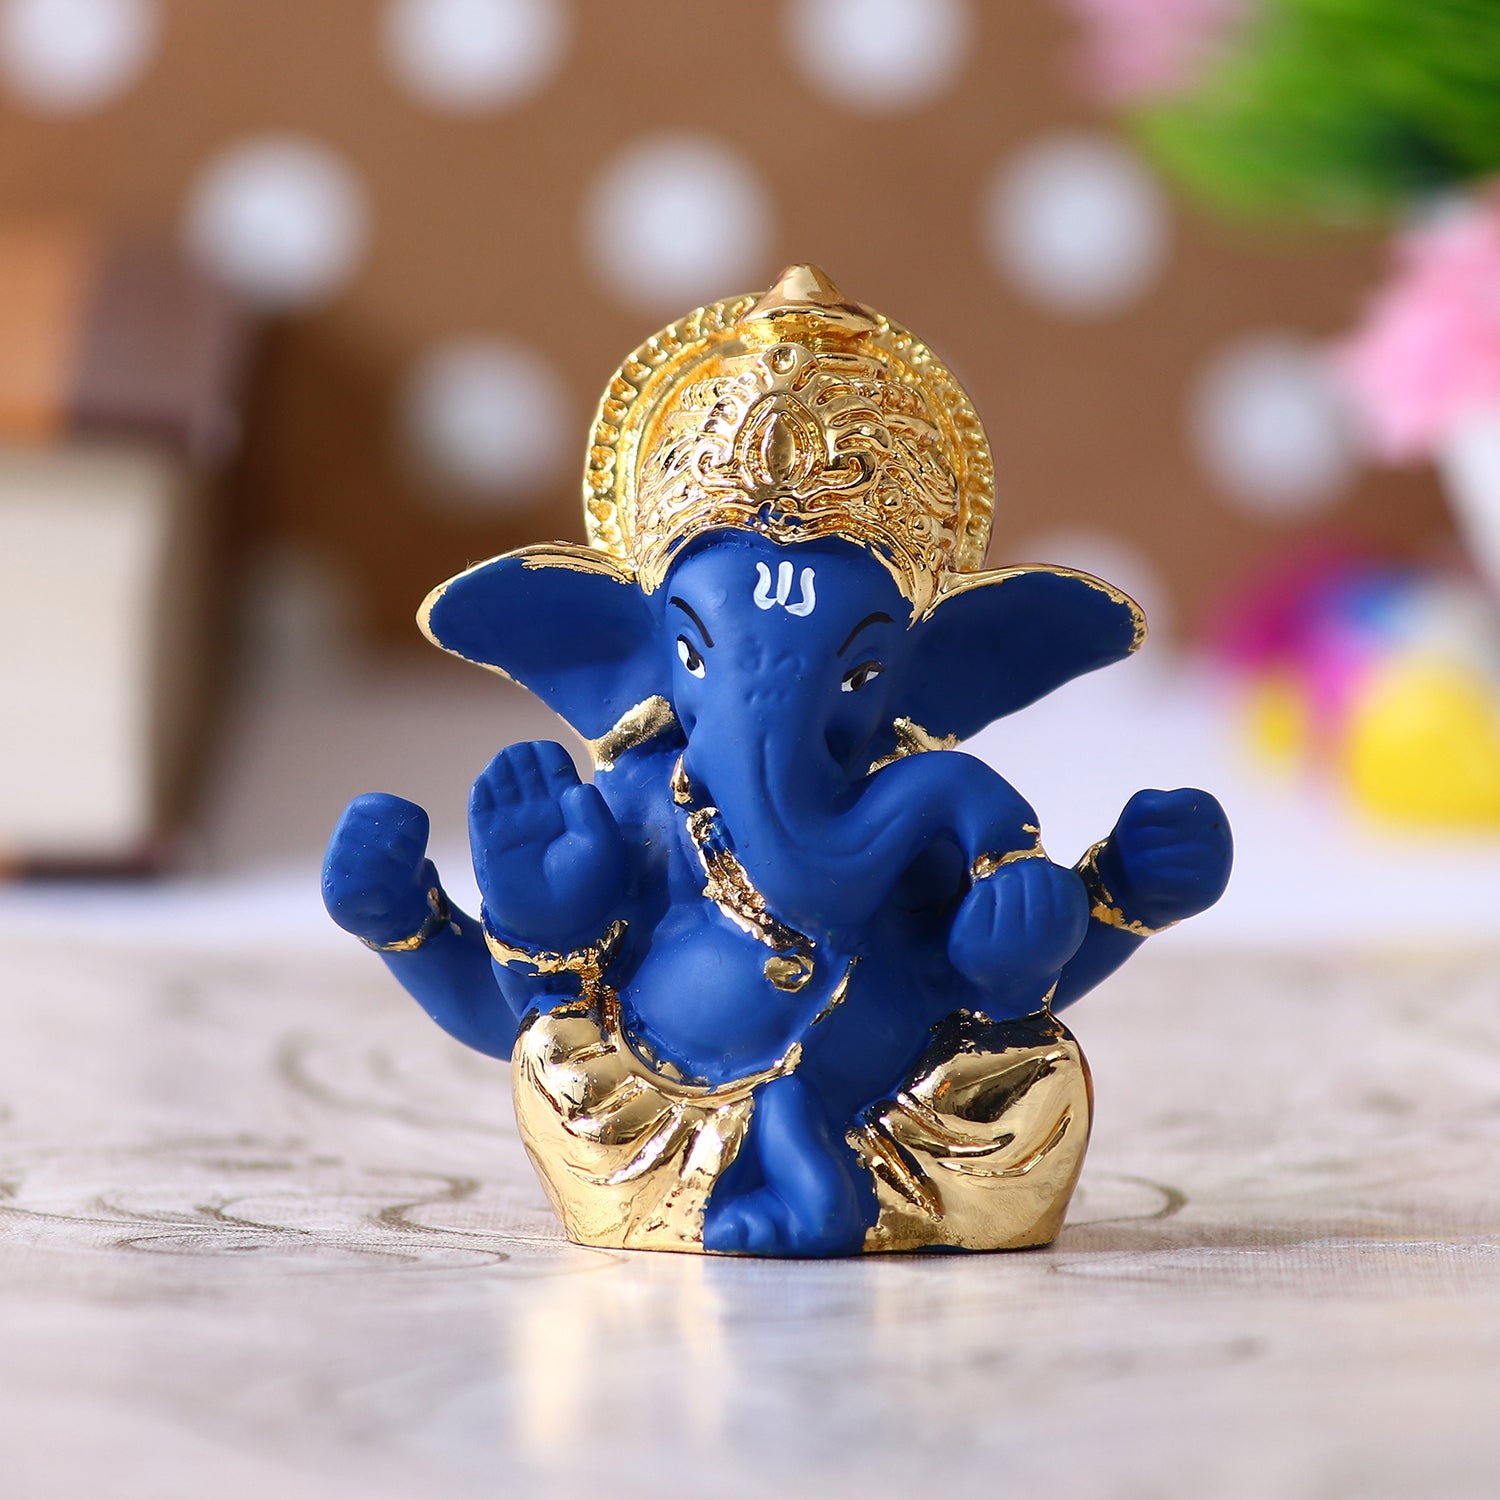 Gold Plated and Blue Polyresin Lord Ganesha Idol for Home, Temple, Office and Car Dashboard